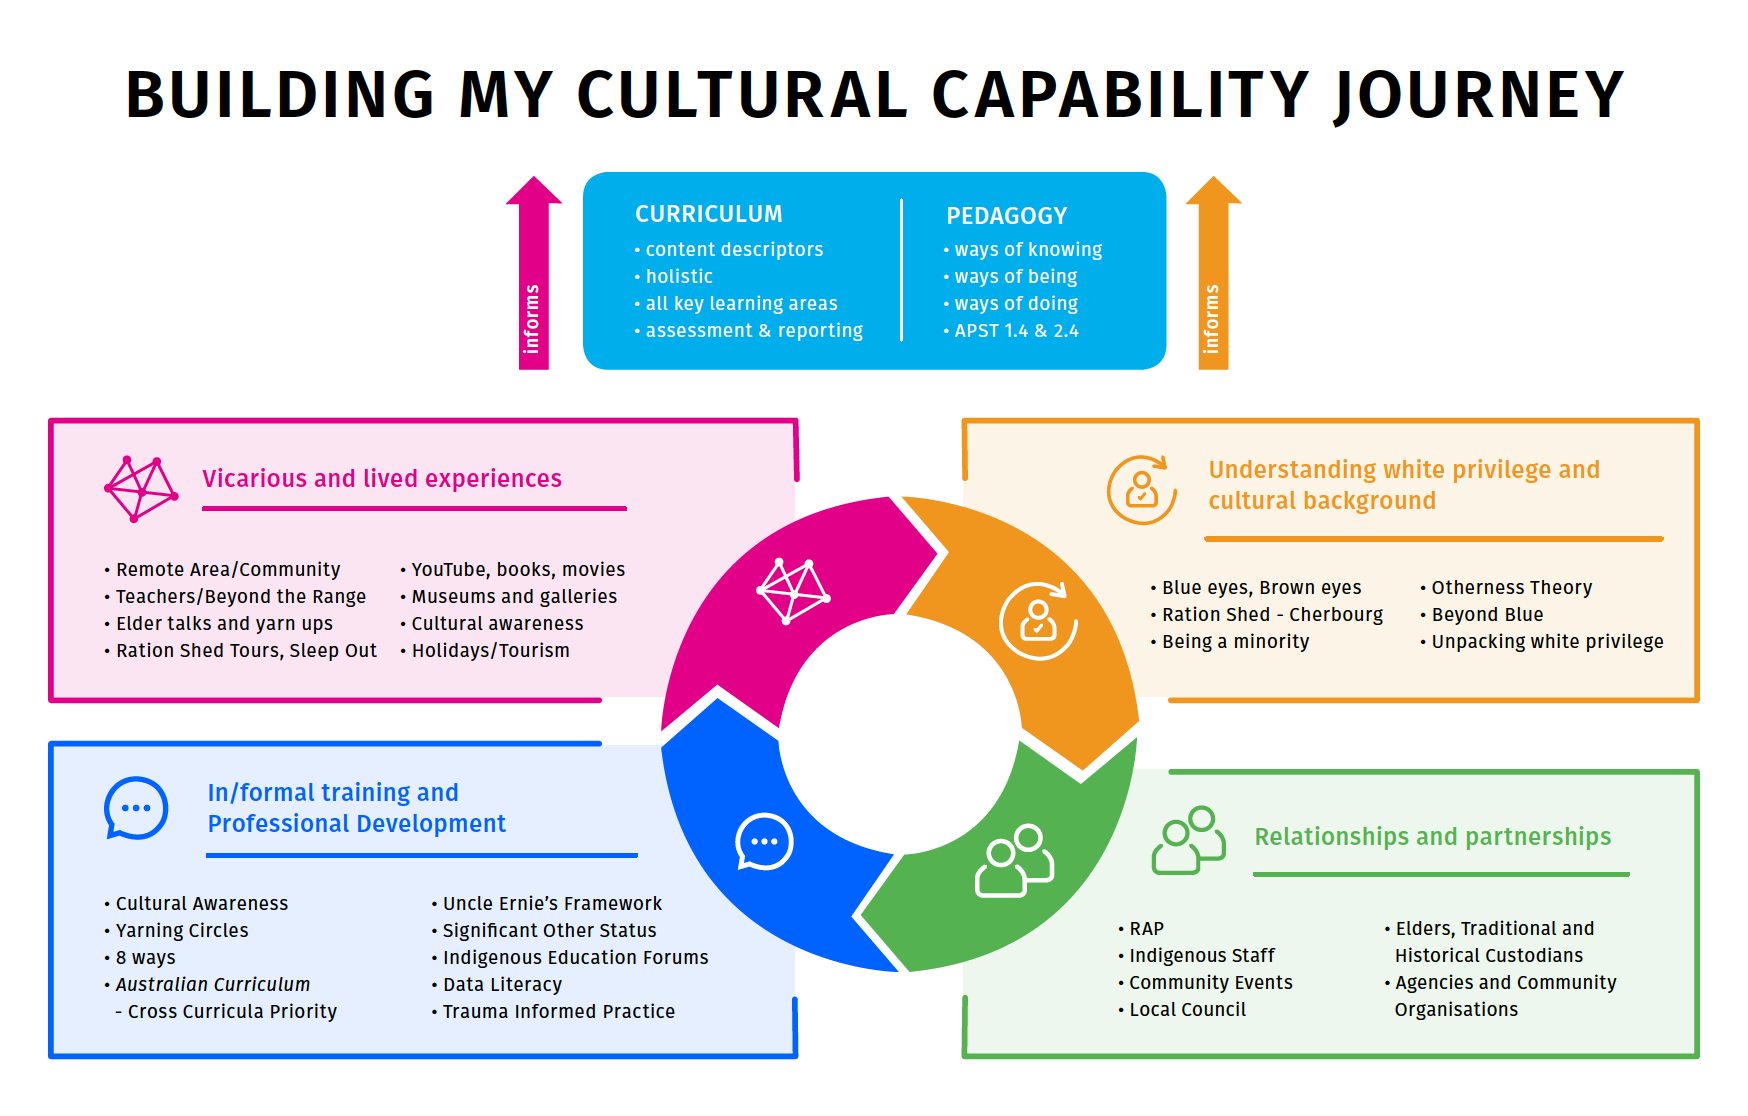 Session 1 : Building my Cultural Capability Journey WEBINAR - Sally Lawrence